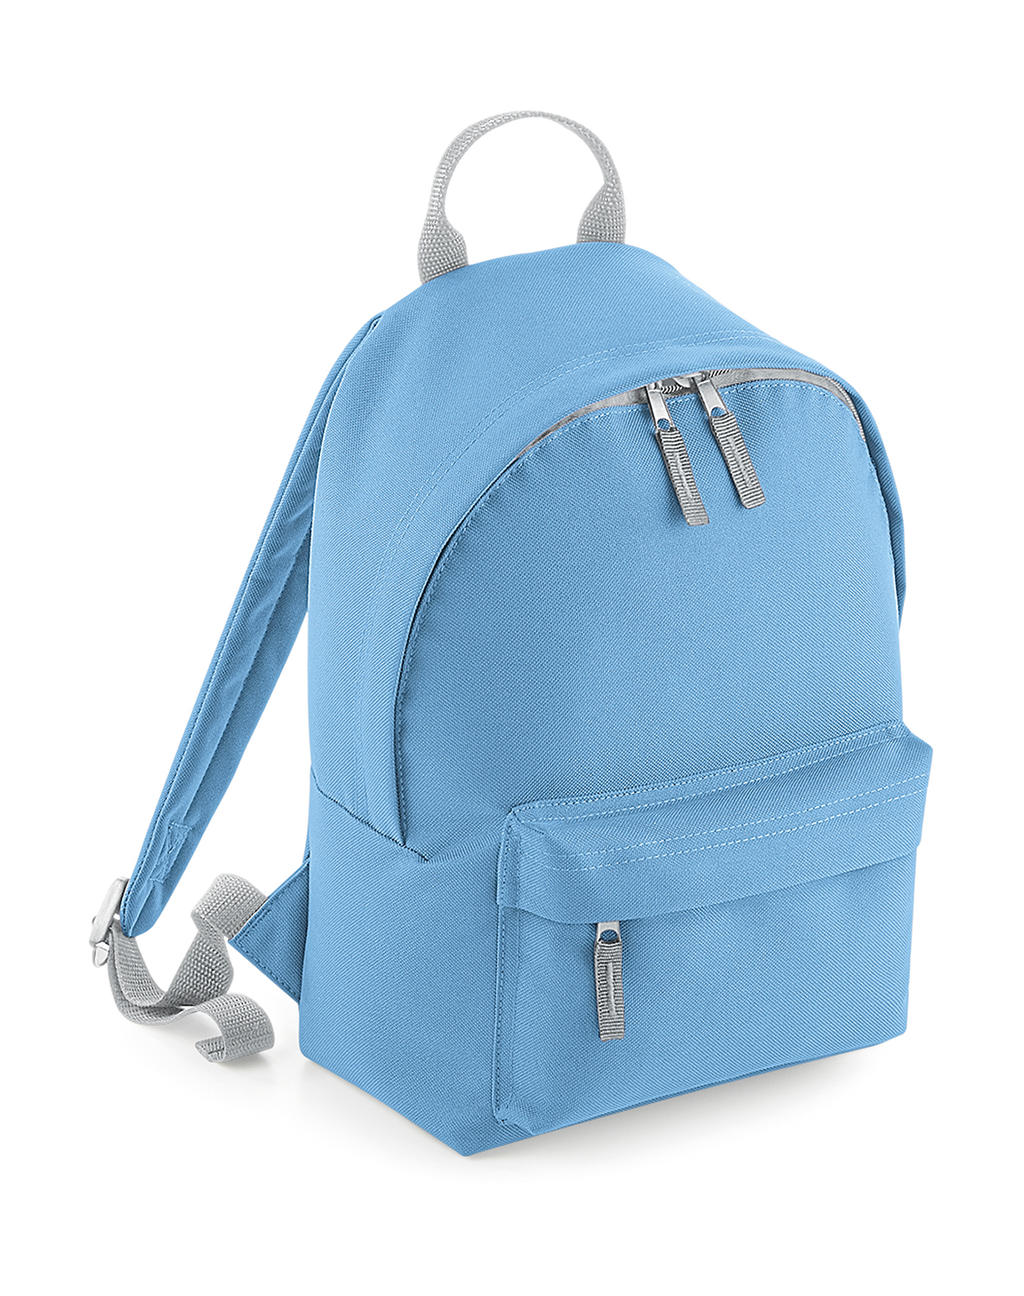  Mini Fashion Backpack in Farbe Sky Blue/Light Grey